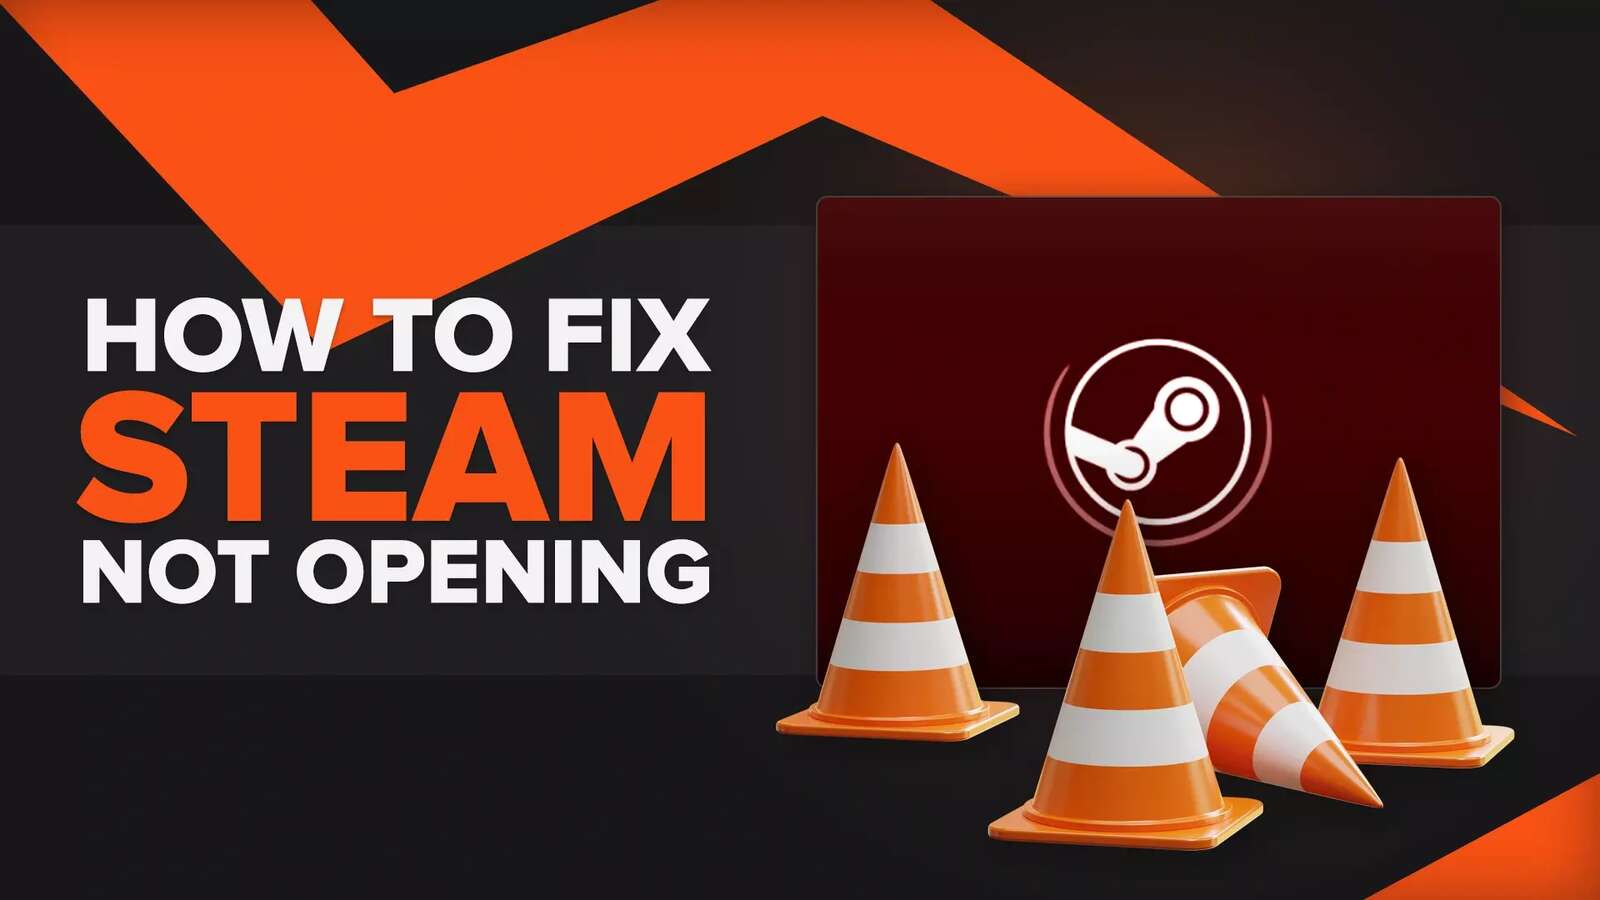 How to Quickly Fix Steam Not Opening on Your Device [8 Ways]